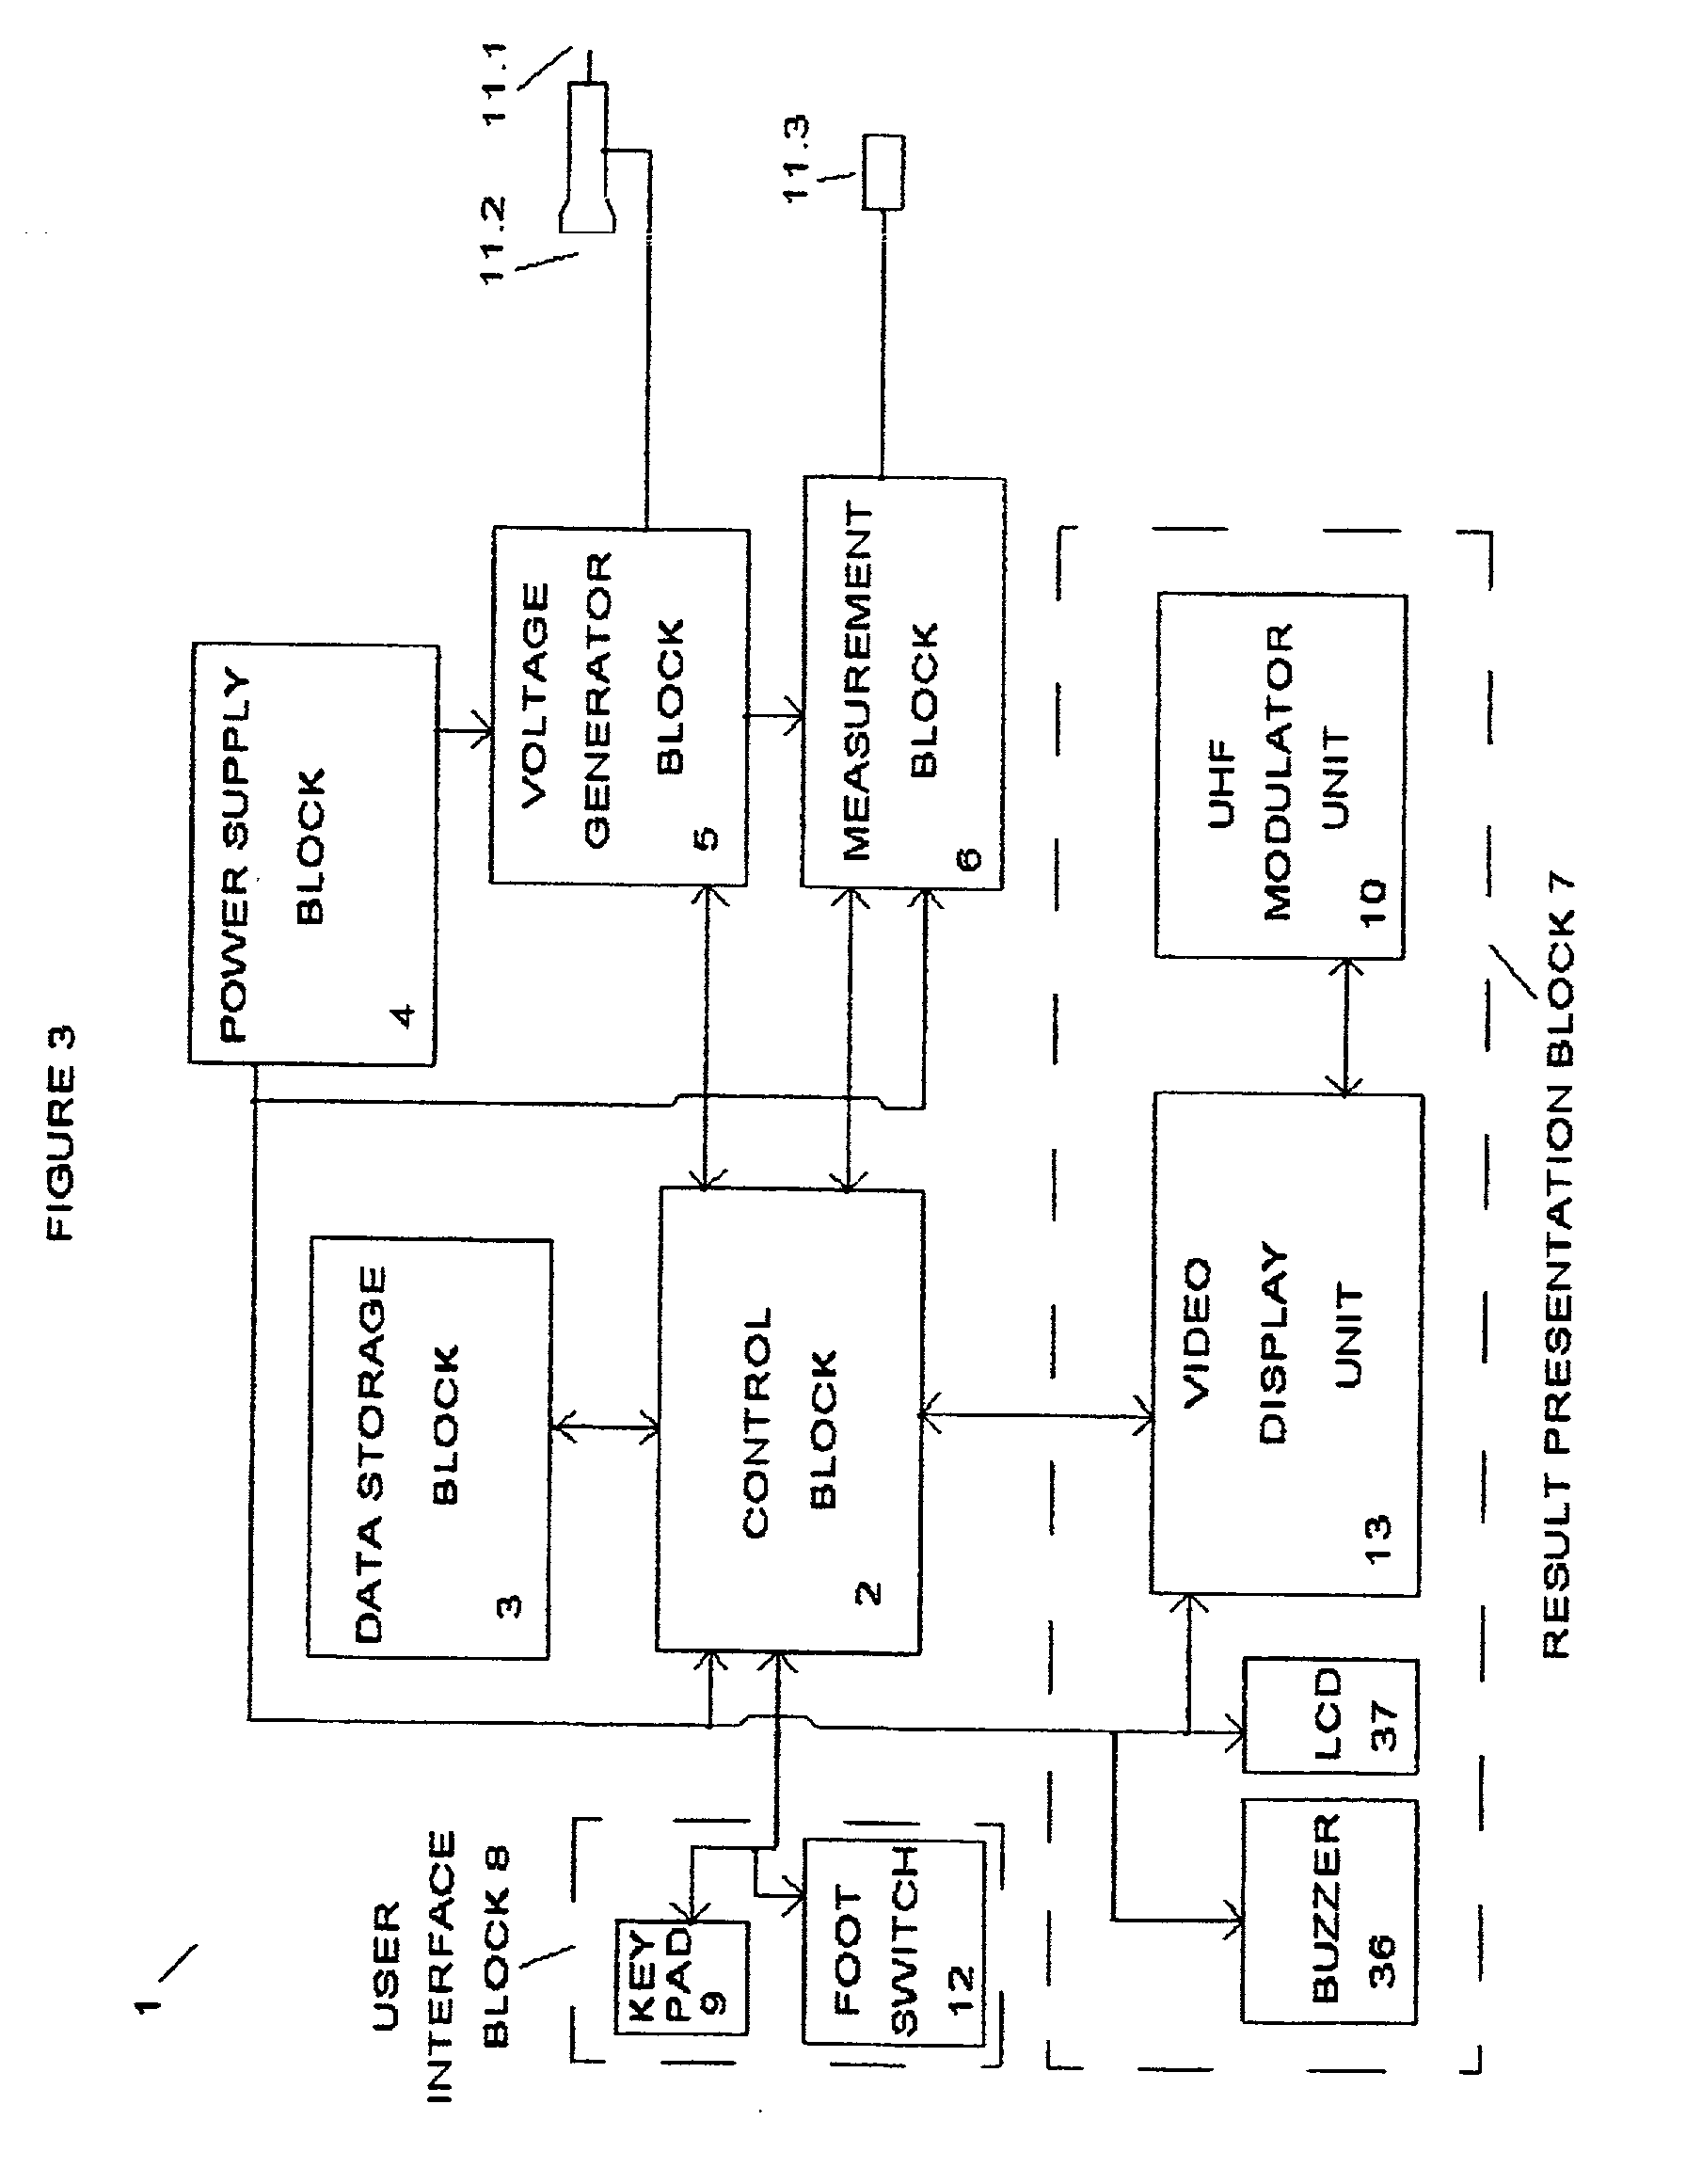 Apparatus for evaluation of skin impedance variations